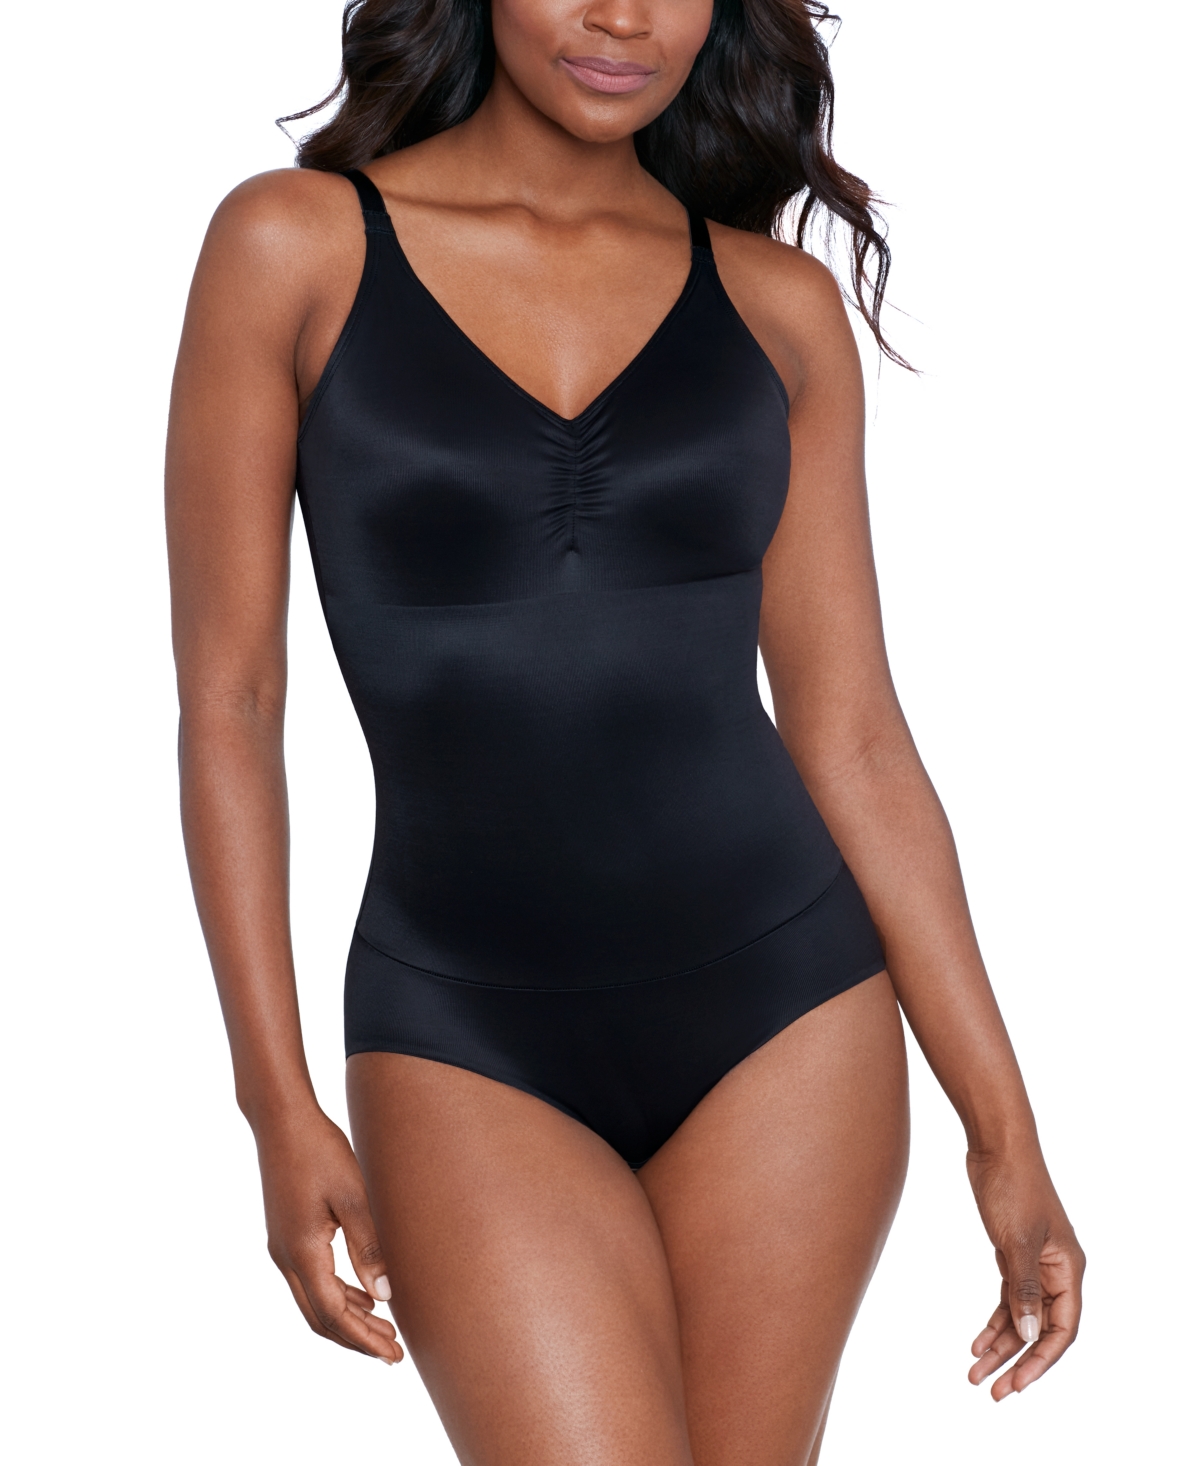 Miraclesuit Women's Shapewear Firm Comfy Curves Wireless Bodybriefer 2510 In Black